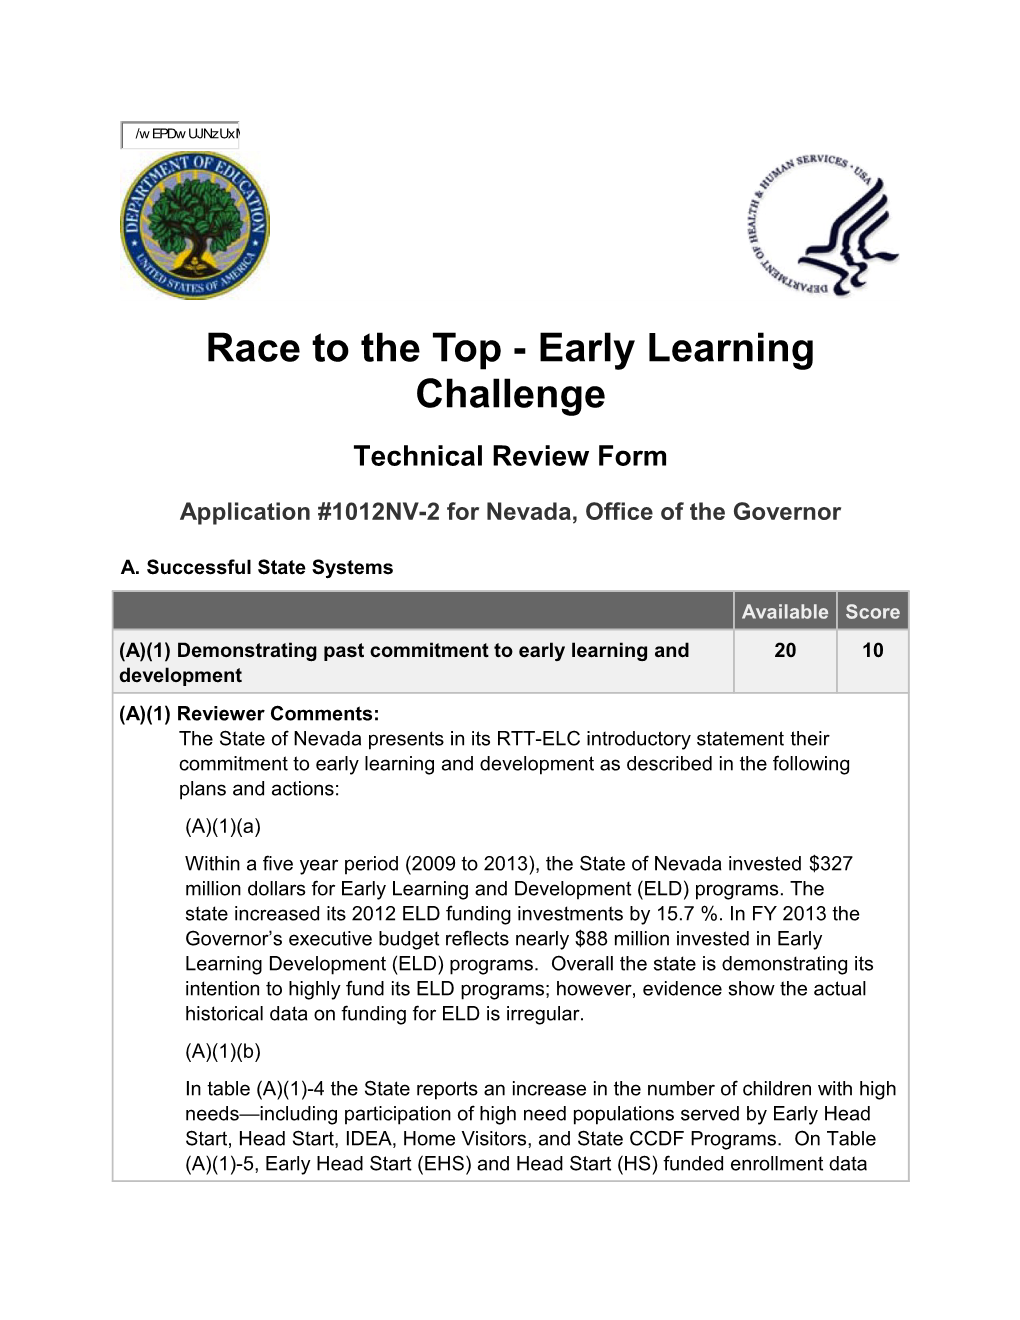 Nevada: Reviewers' Comments and Scores for Phase 3, Race to the Top-Early Learning Challenge